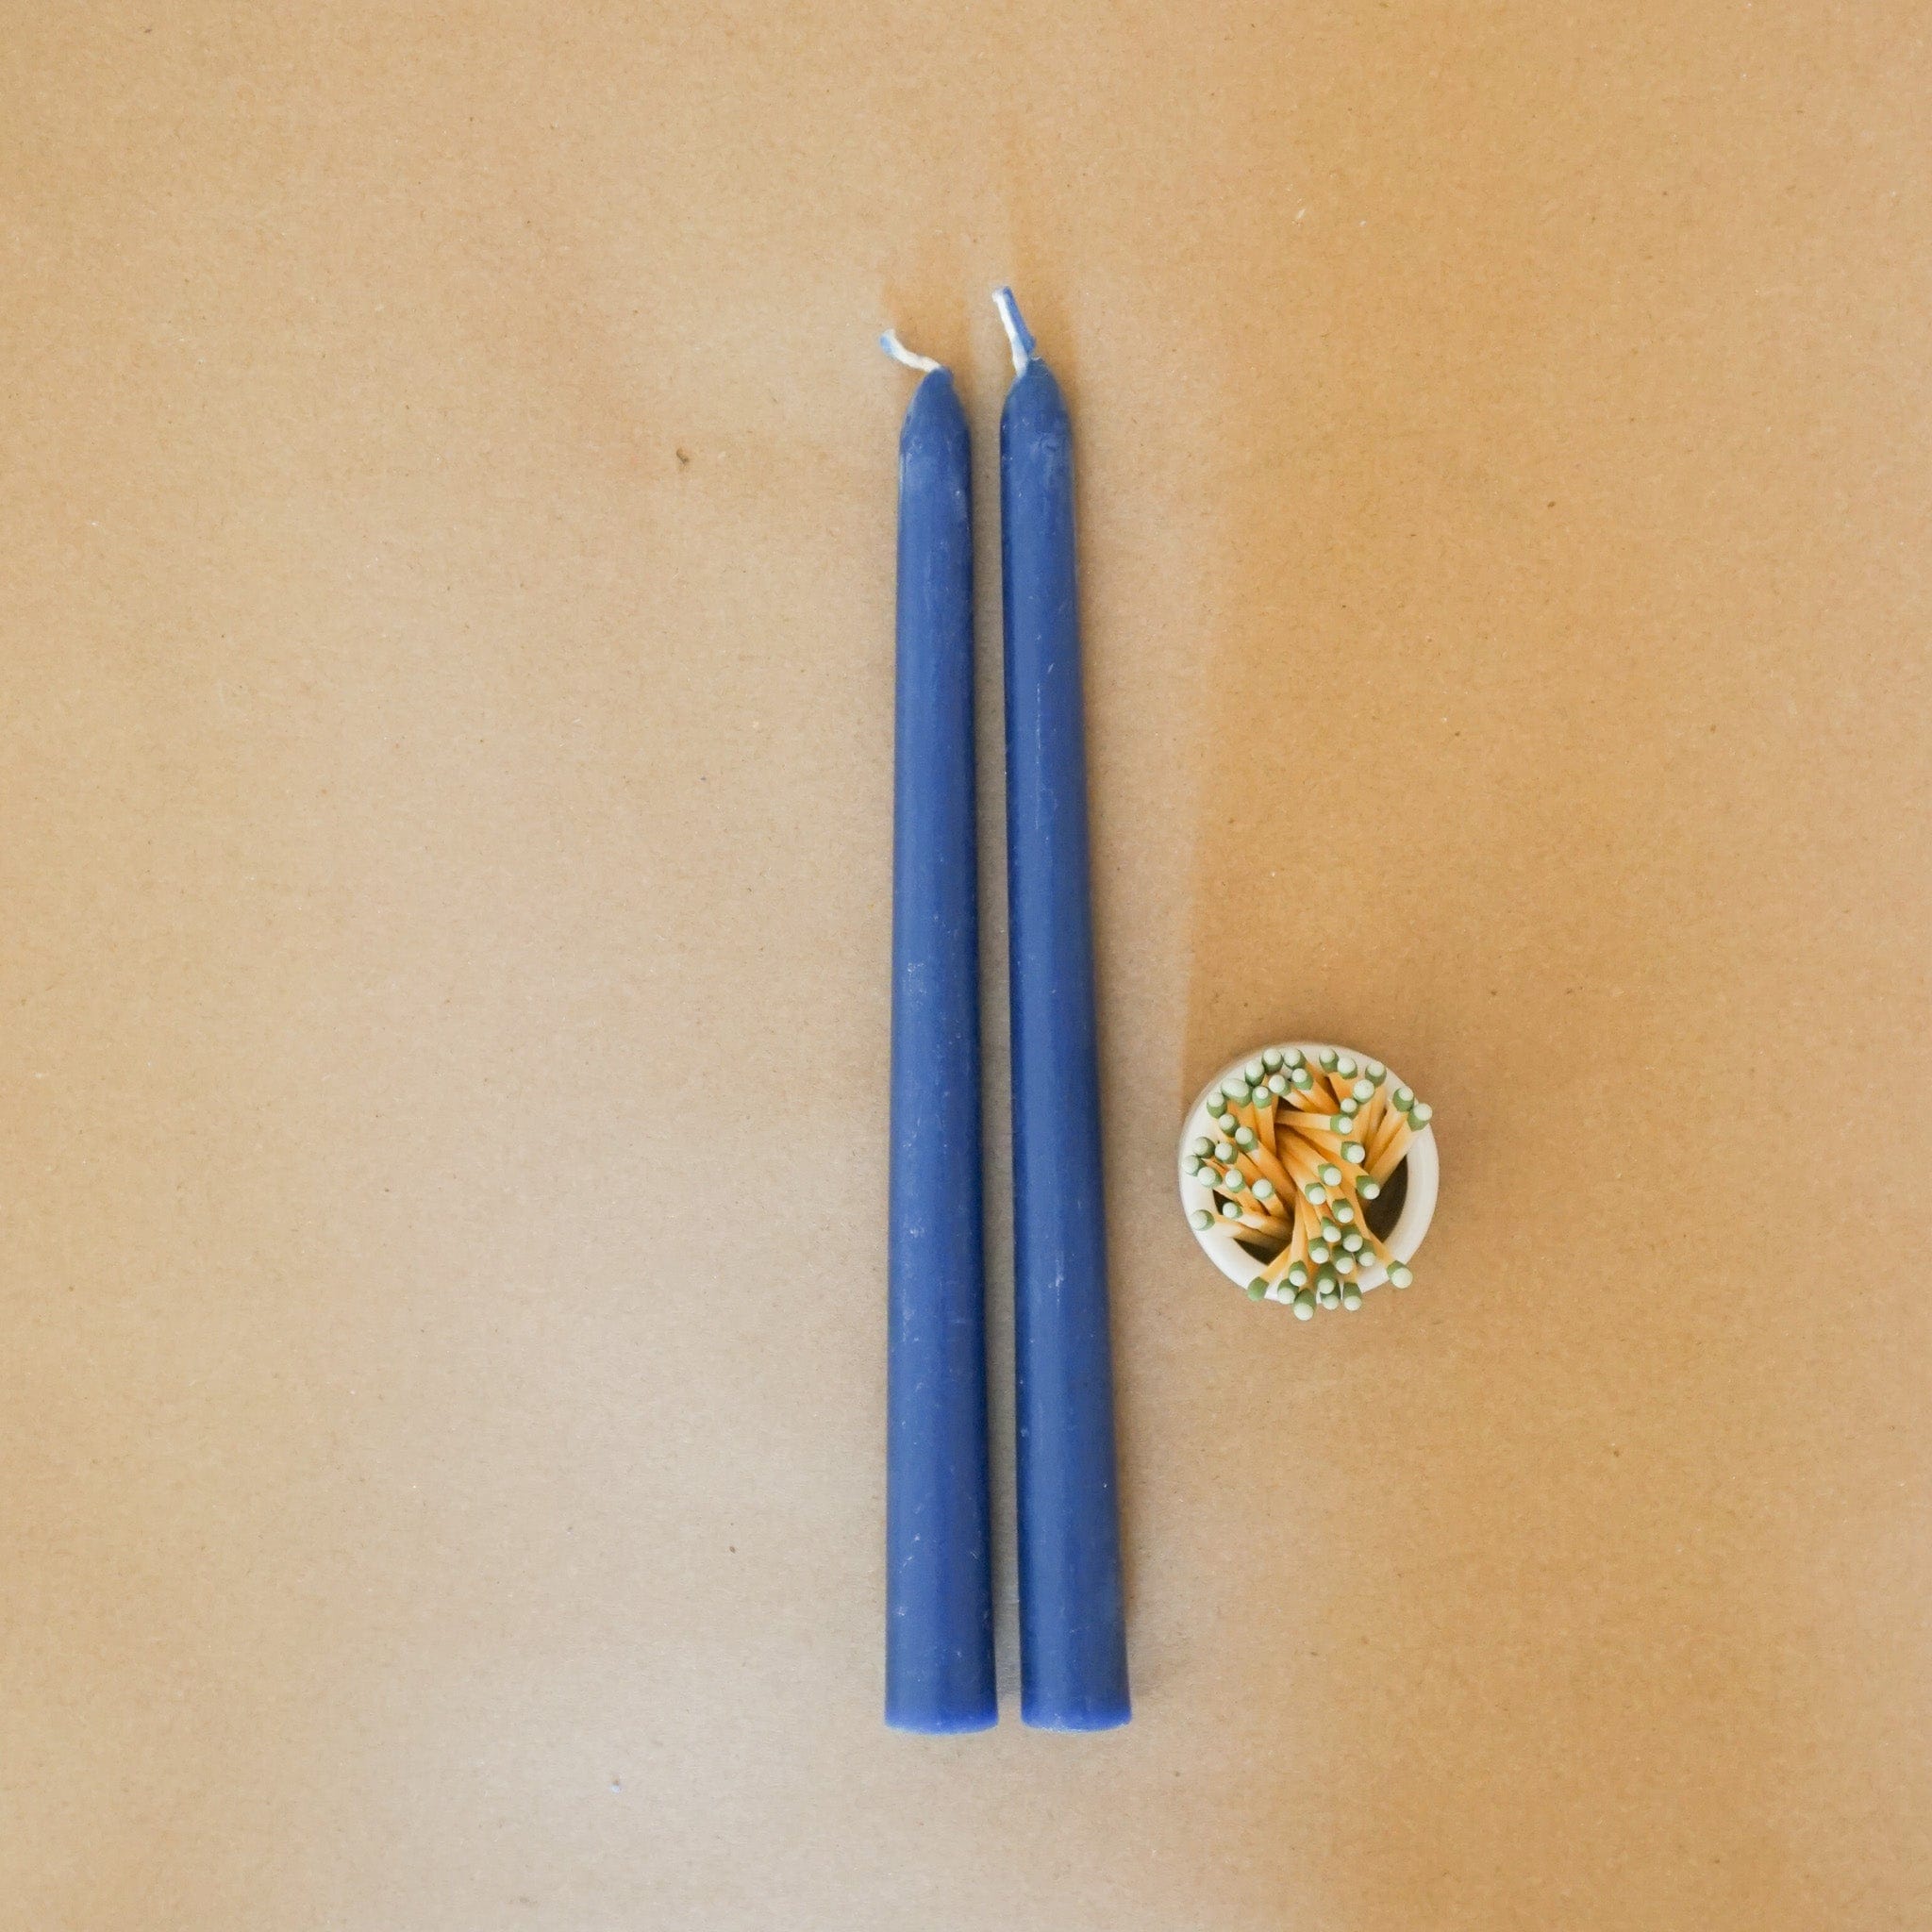 GREENTREE CANDLES Decor Cobalt / 10 Taper Candles by Greentree